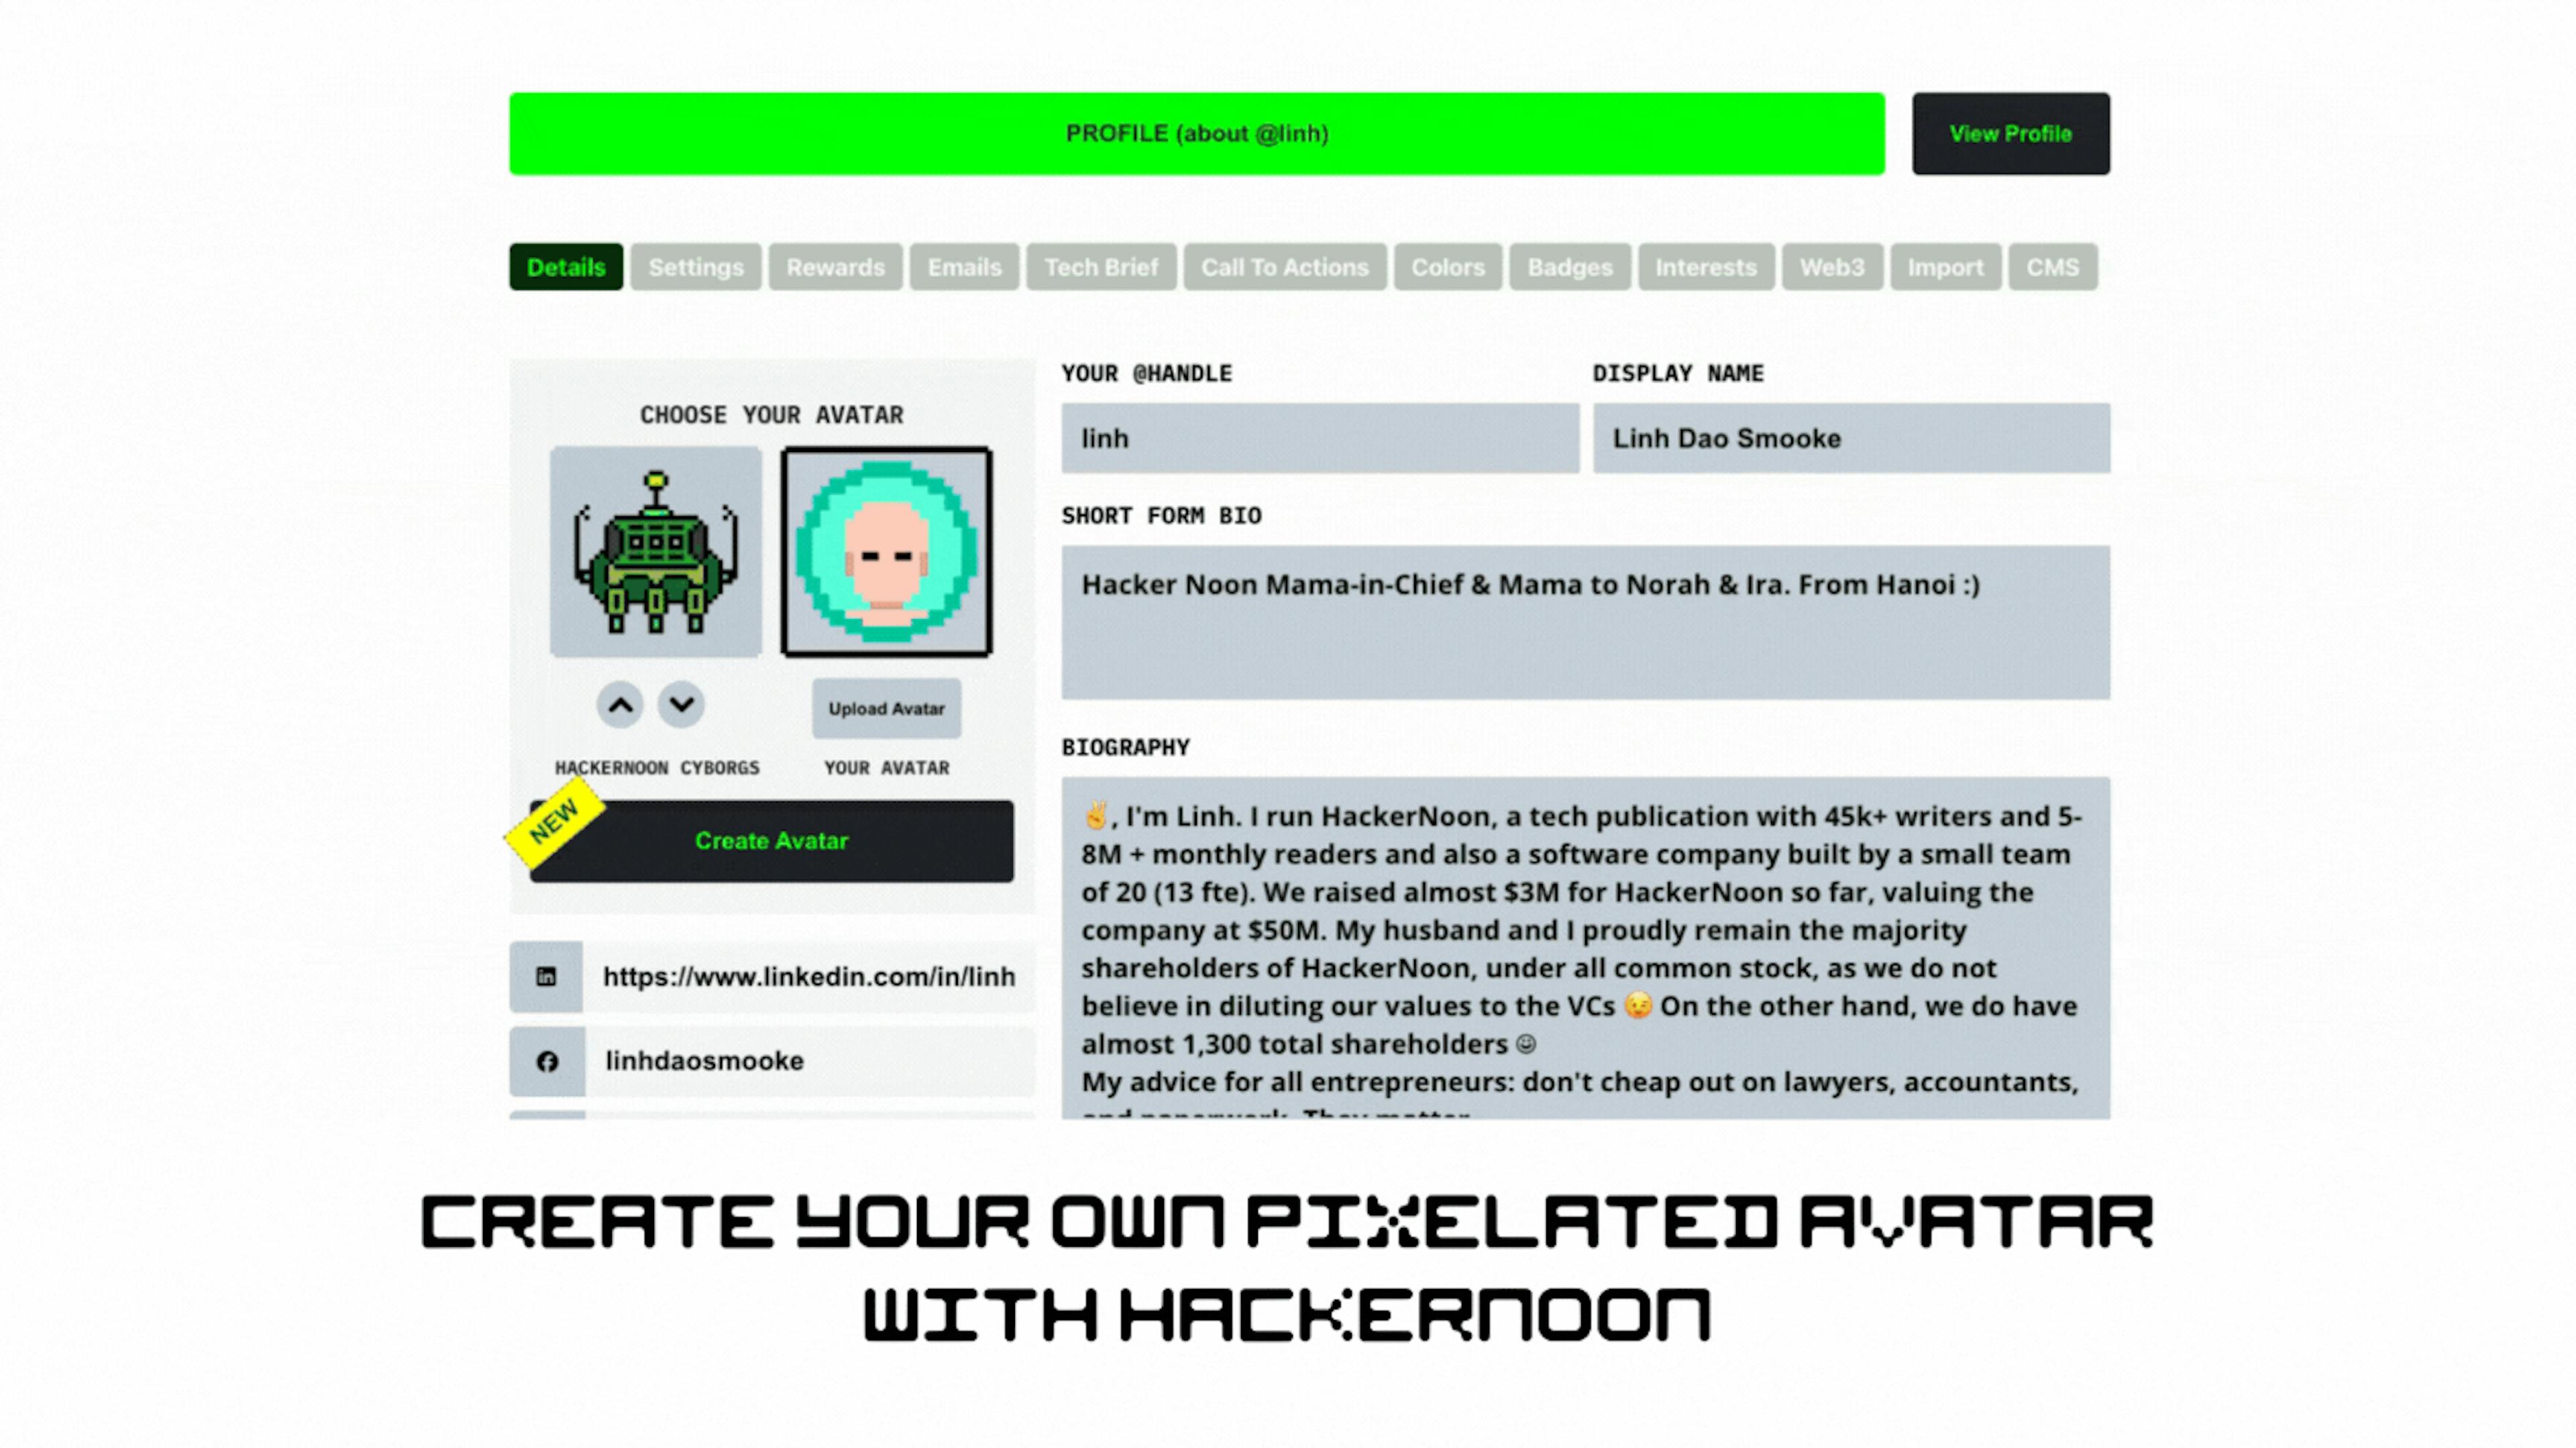 featured image - Create Your Own Pixelated Avatar With HackerNoon